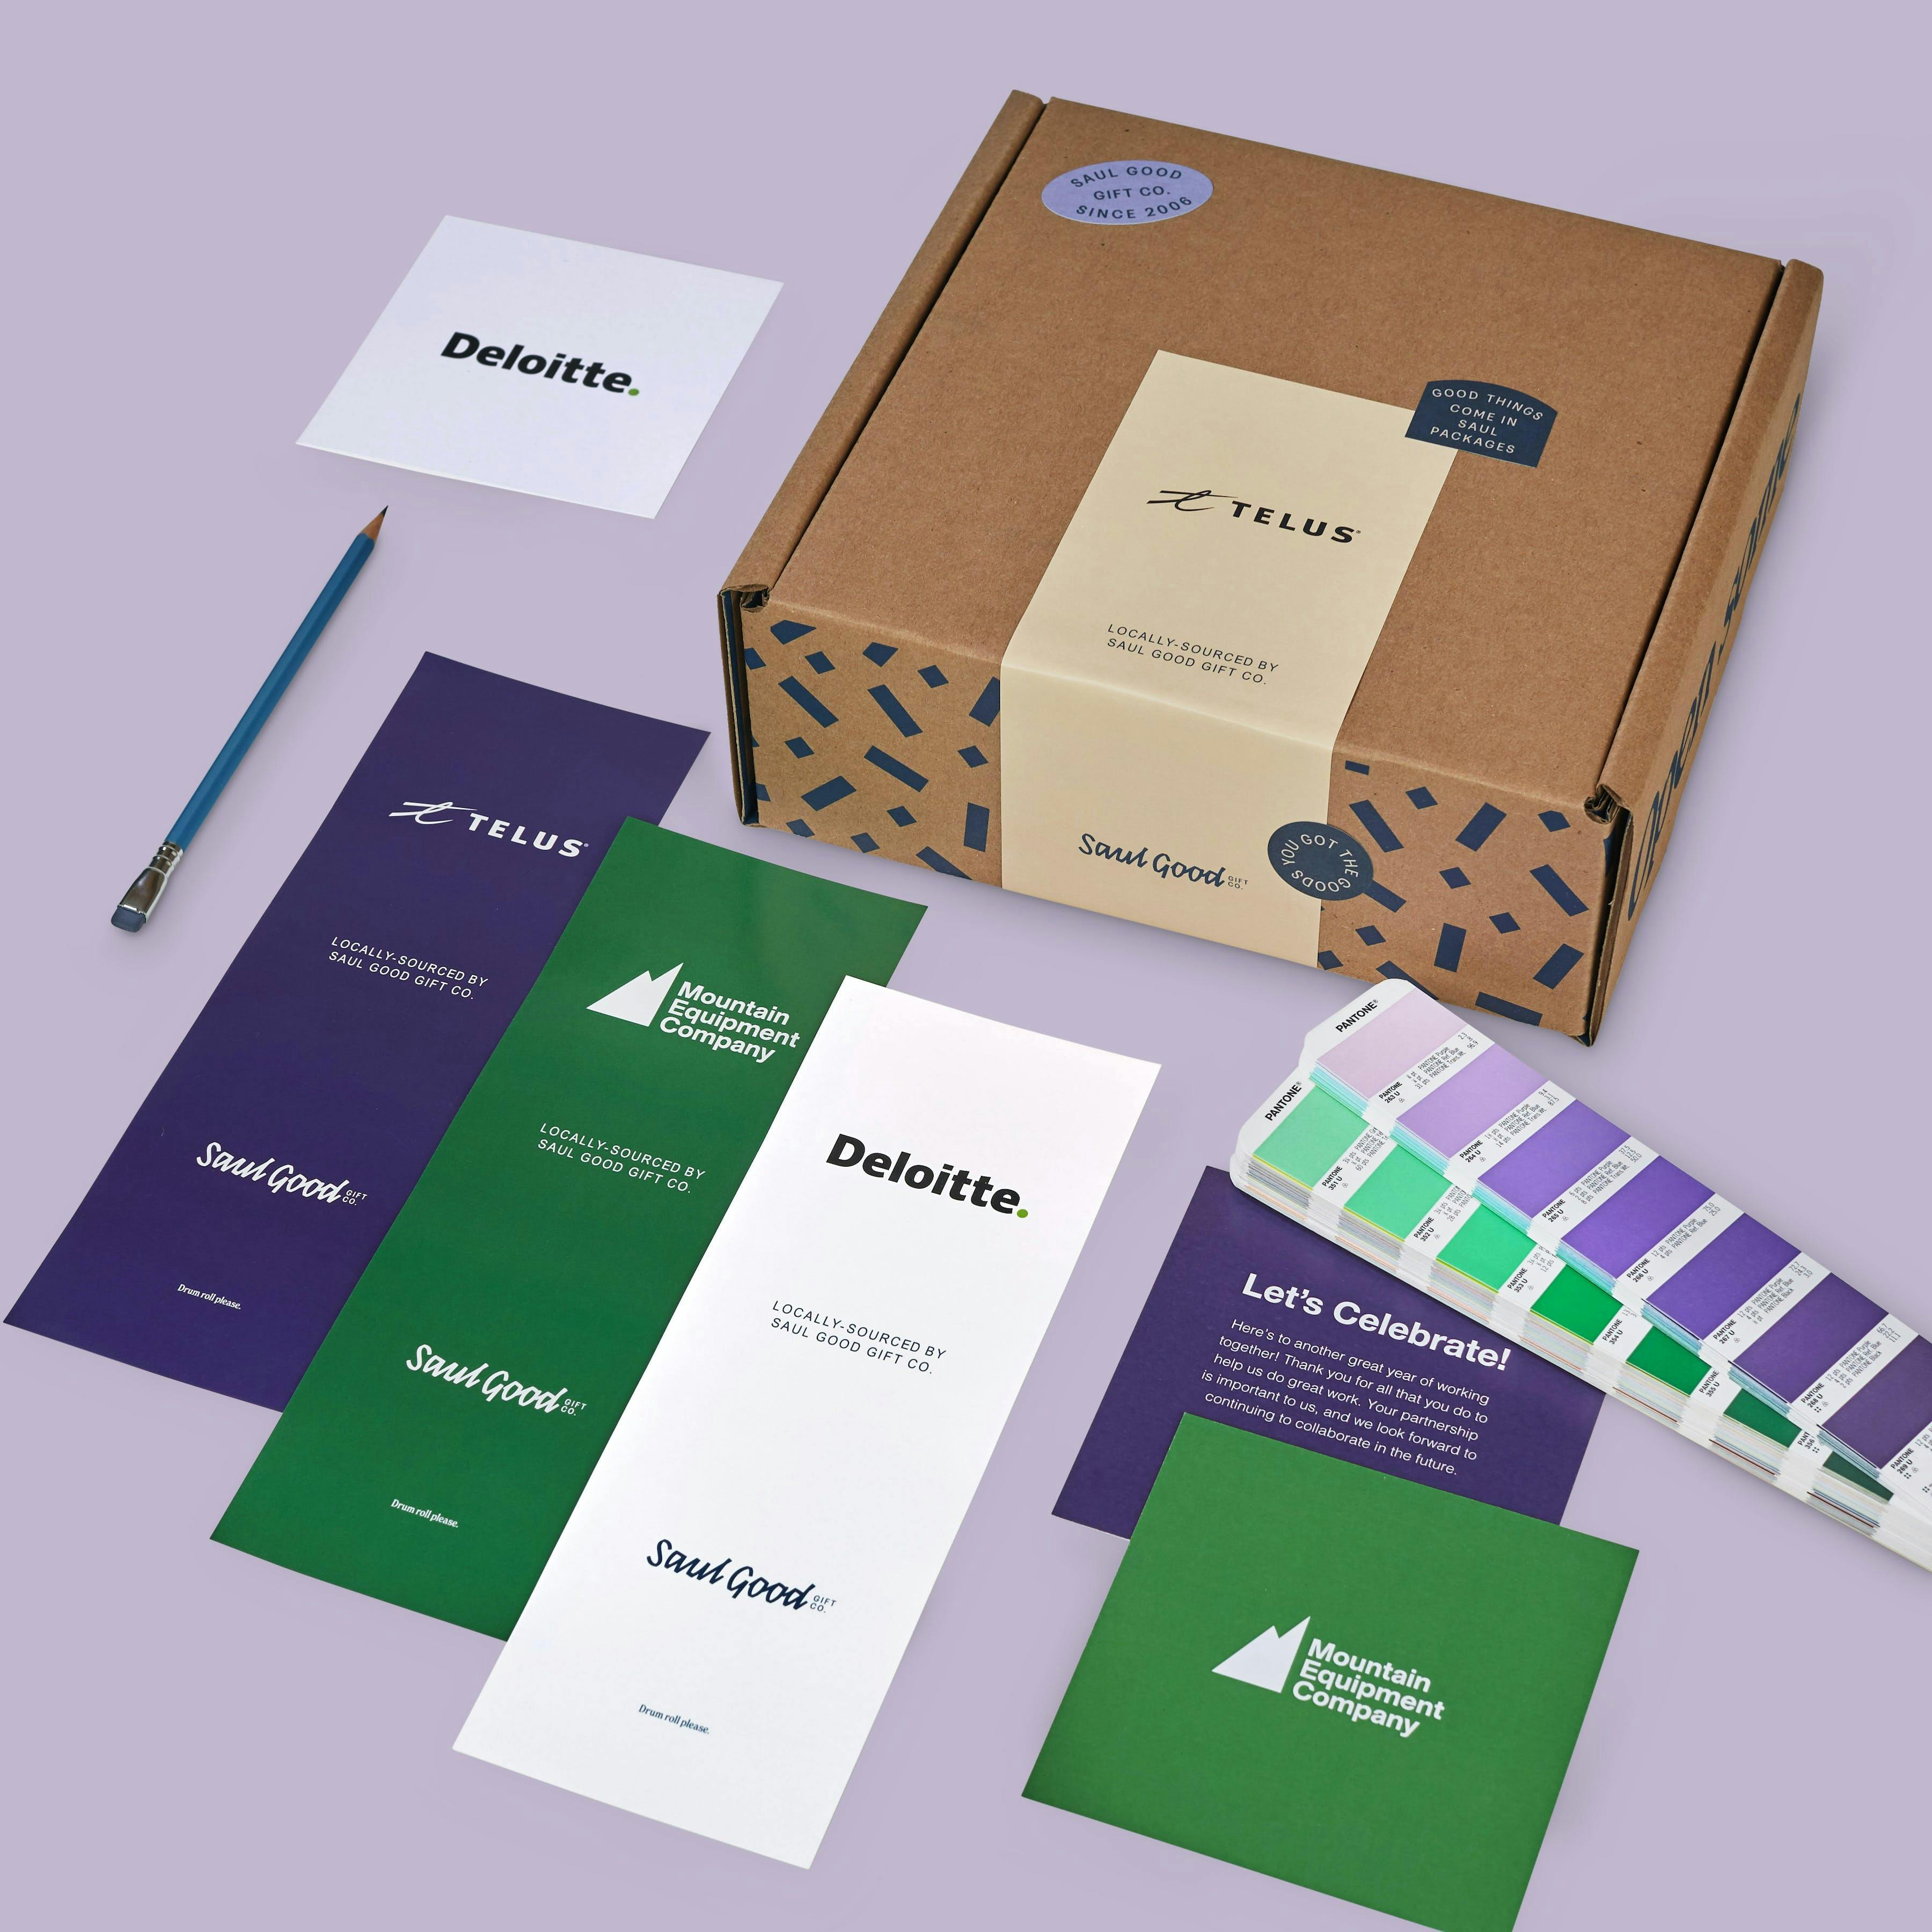 Branded gift boxes and branded greeting cards showing examples from companies like Telus, Deloitte and MEC